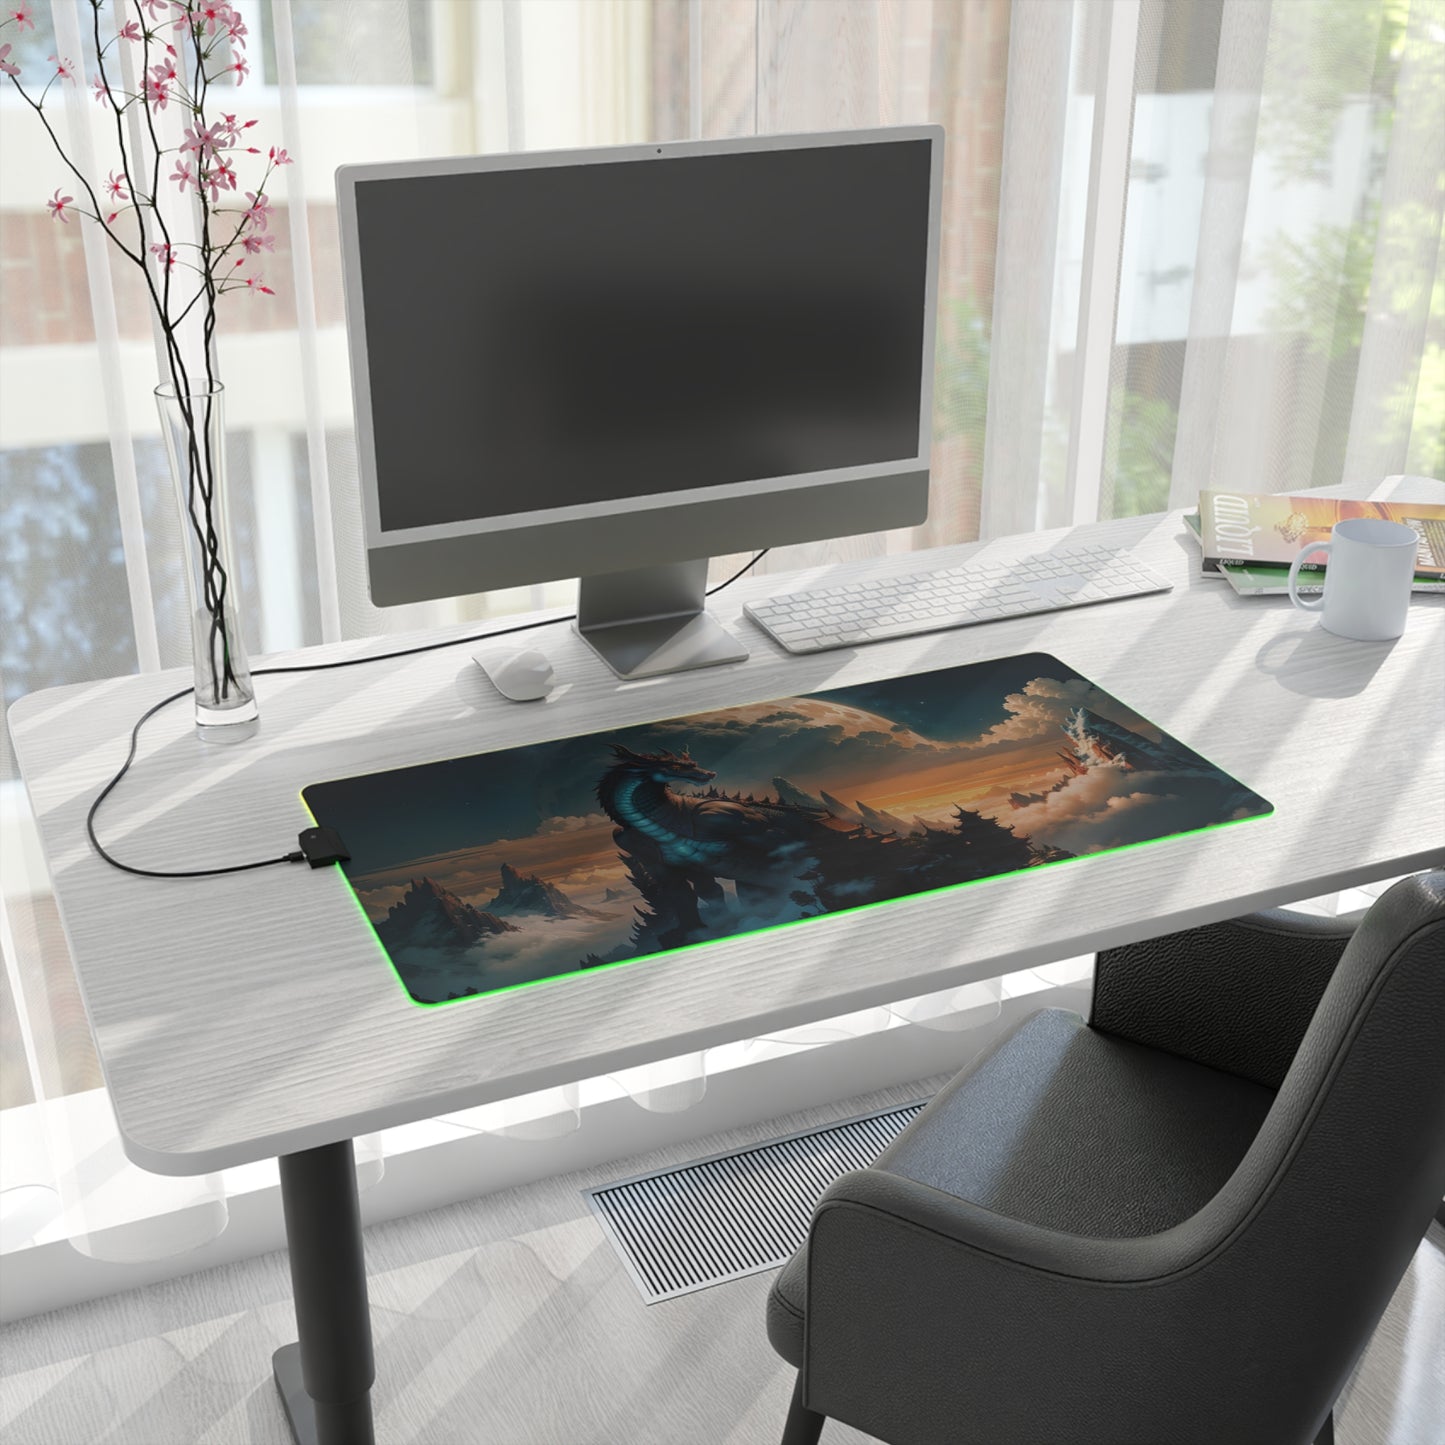 Temple Guardian LED Gaming Mouse Pad